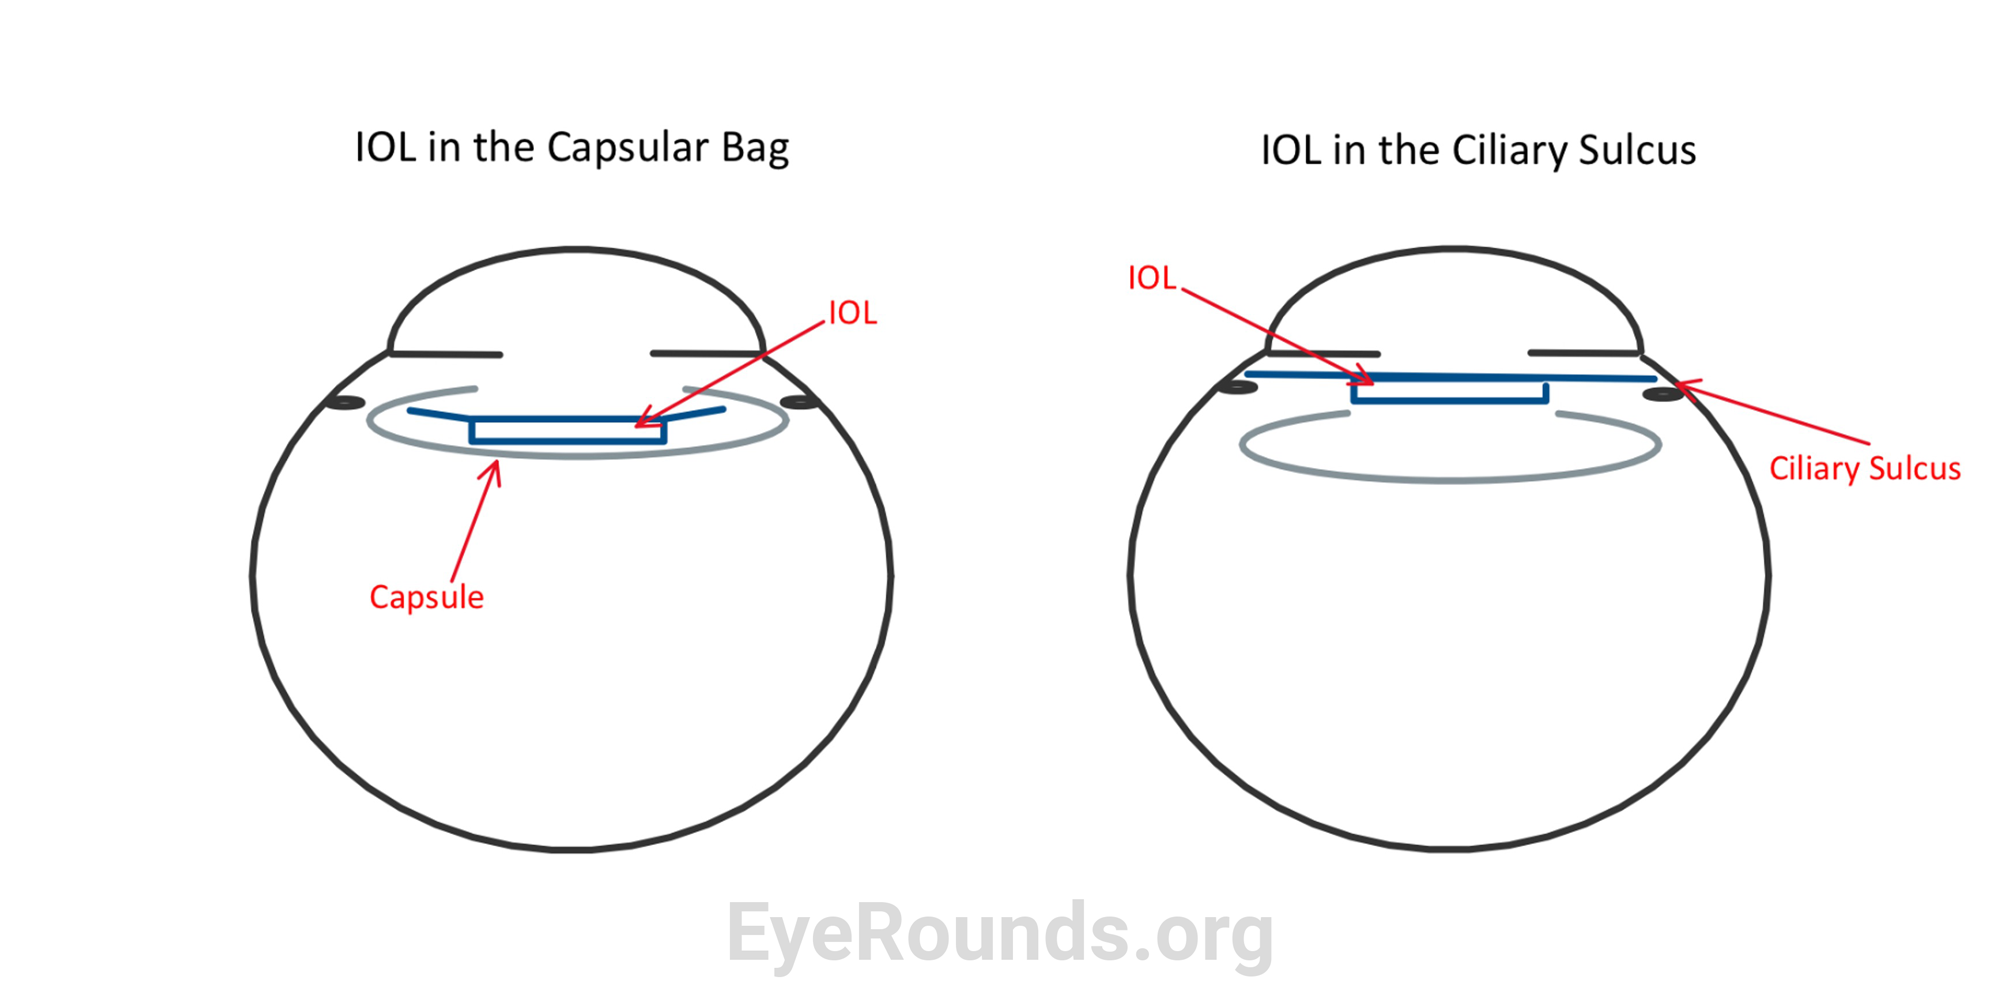 Position of IOL in the ciliary sulcus versus position in the capsular bag